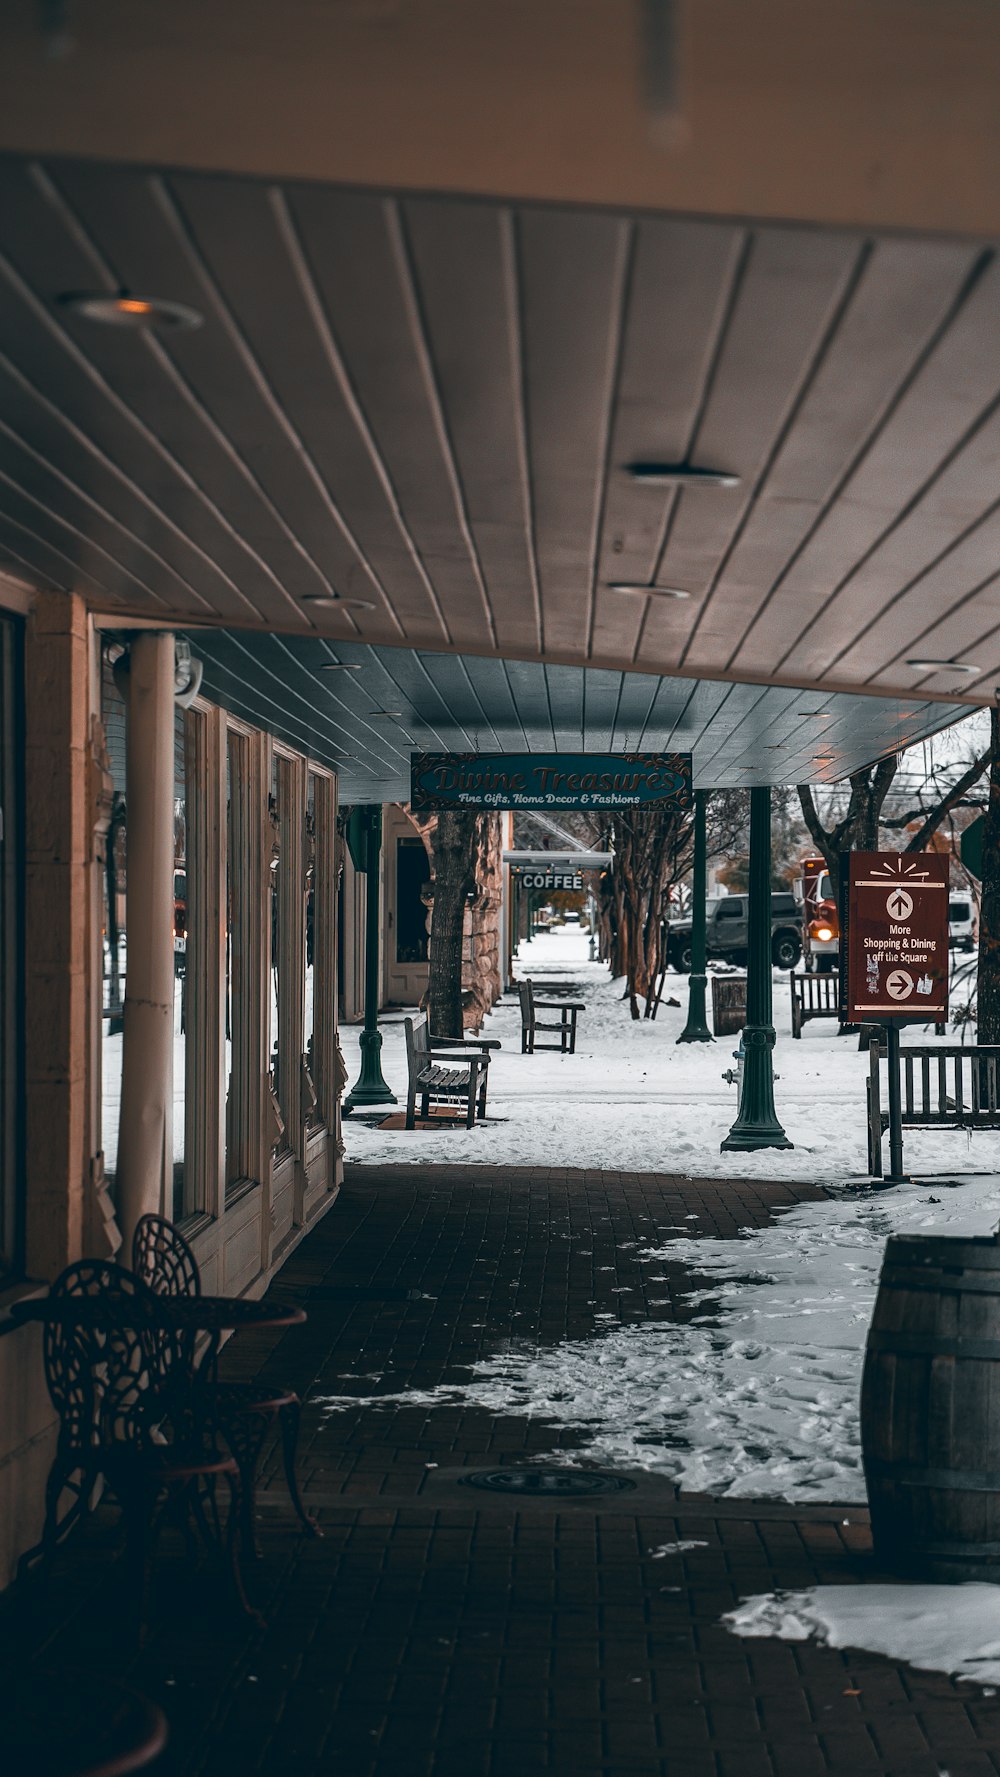 a snowy sidewalk with benches and a sign